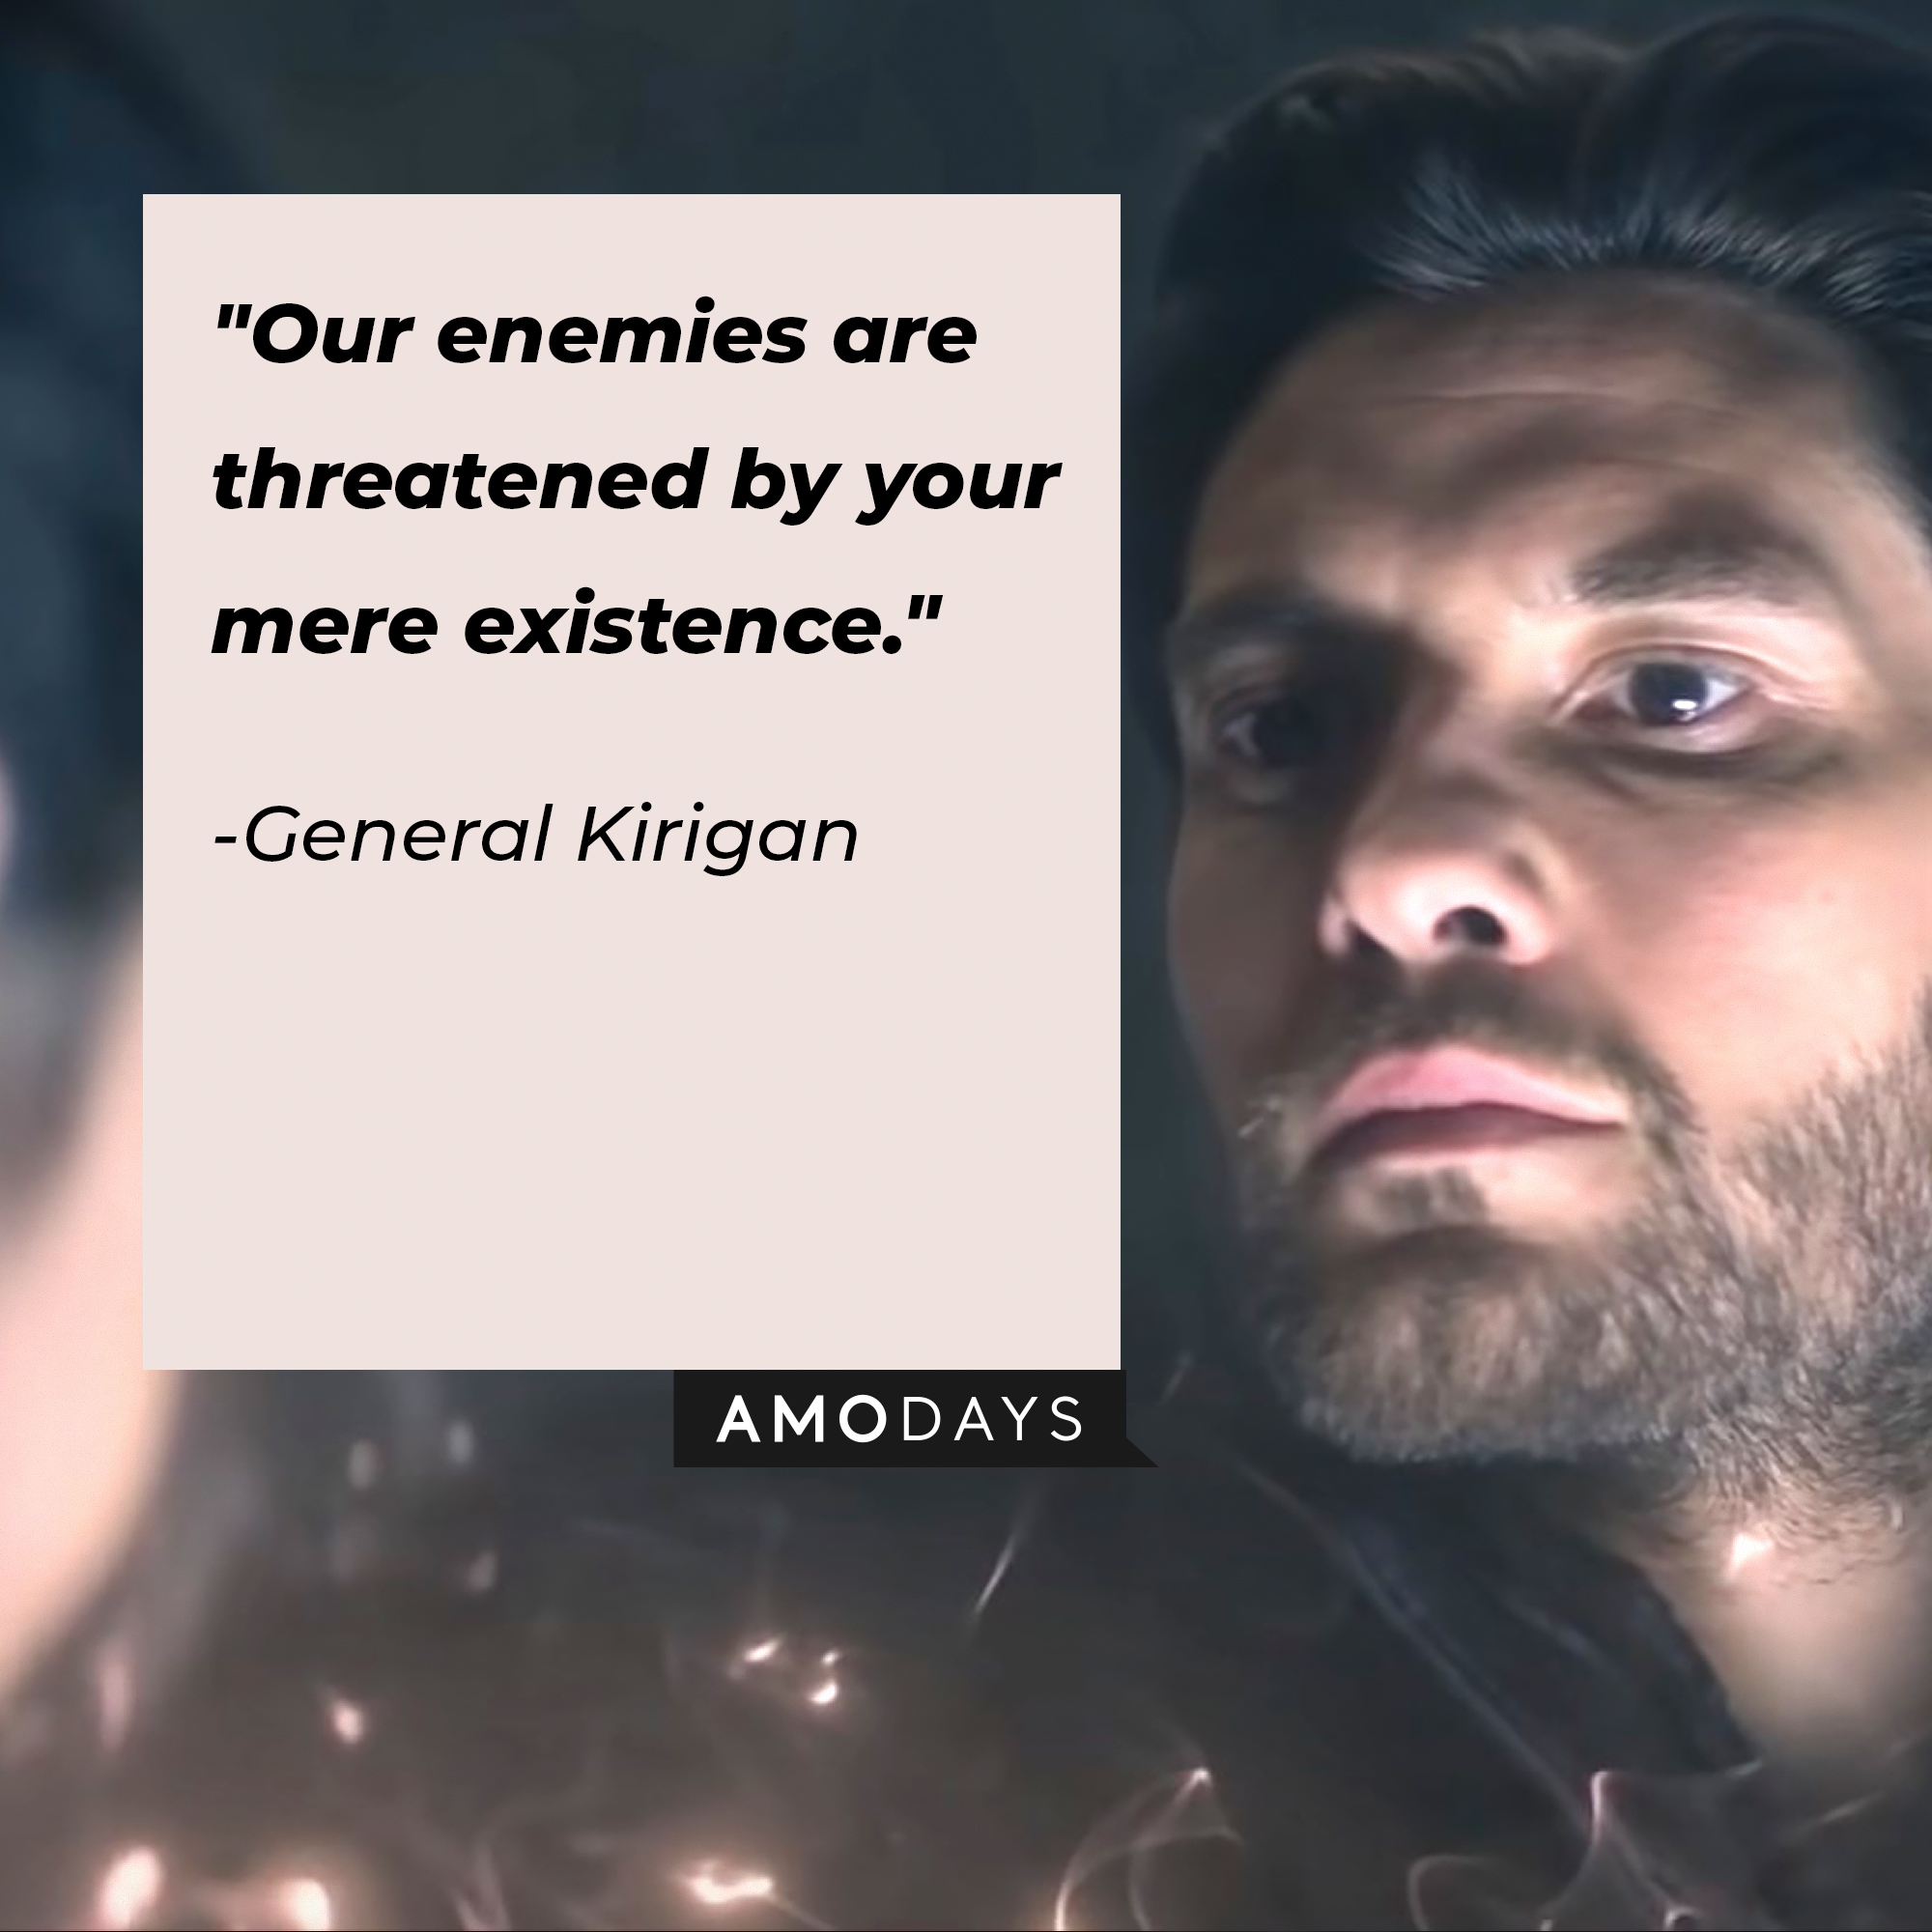 General Kirigan's quote: "Our enemies are threatened by your mere existence." | Image: AmoDays